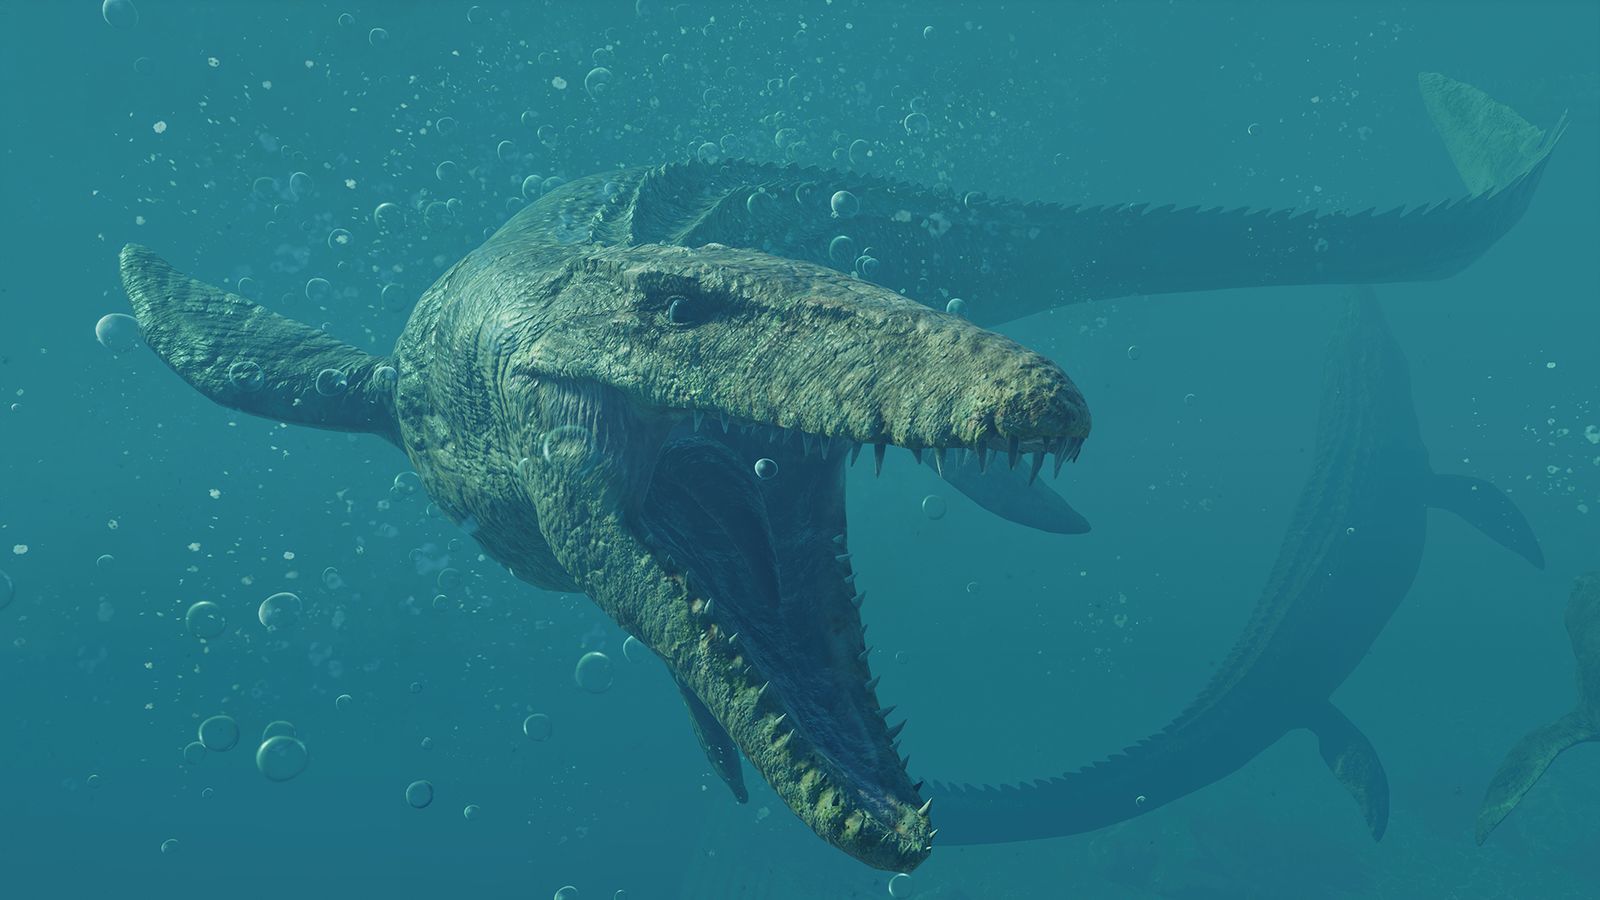 A Mosasaurus, one of the new dinosaurs in Jurassic World Evolution 2